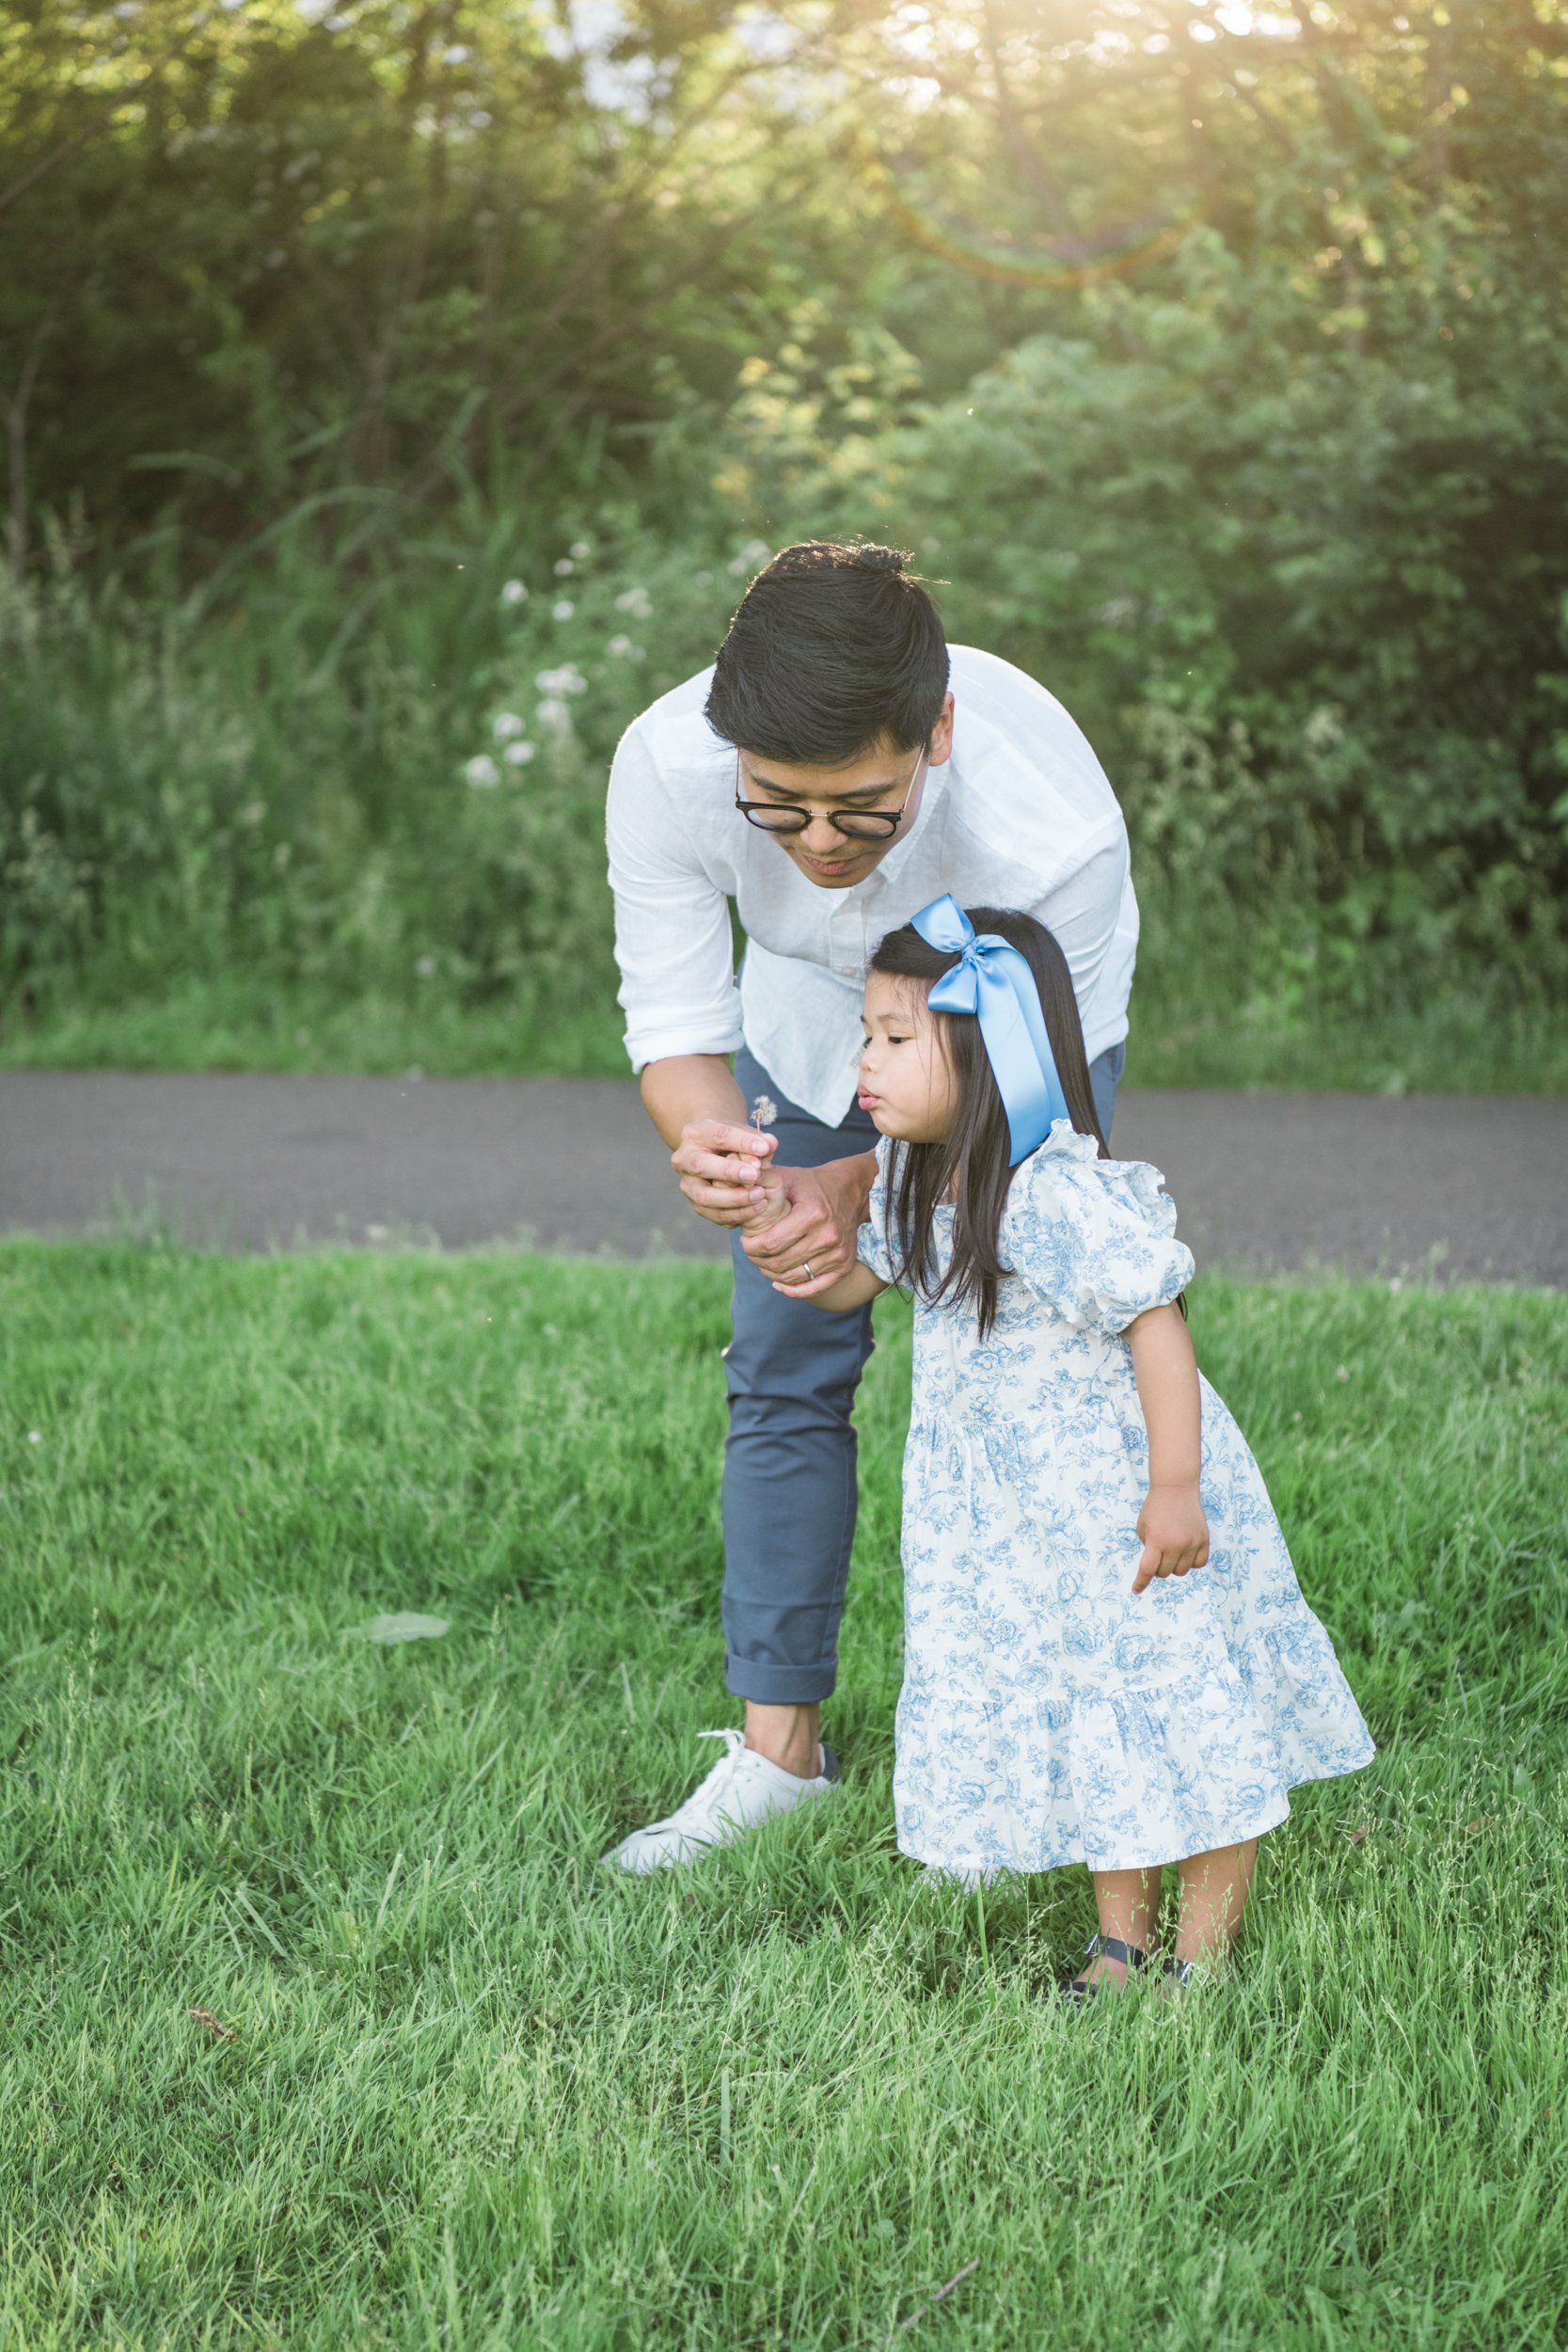  Dad helps his daughter blow a dandelion during a family portrait session in Westfield NJ #seniorportraits #familyportraits #veronanj #westfieldnj #nicolehawkinsphotography #newjerseyphotographer  #portraitphotography #heirloomphotography 